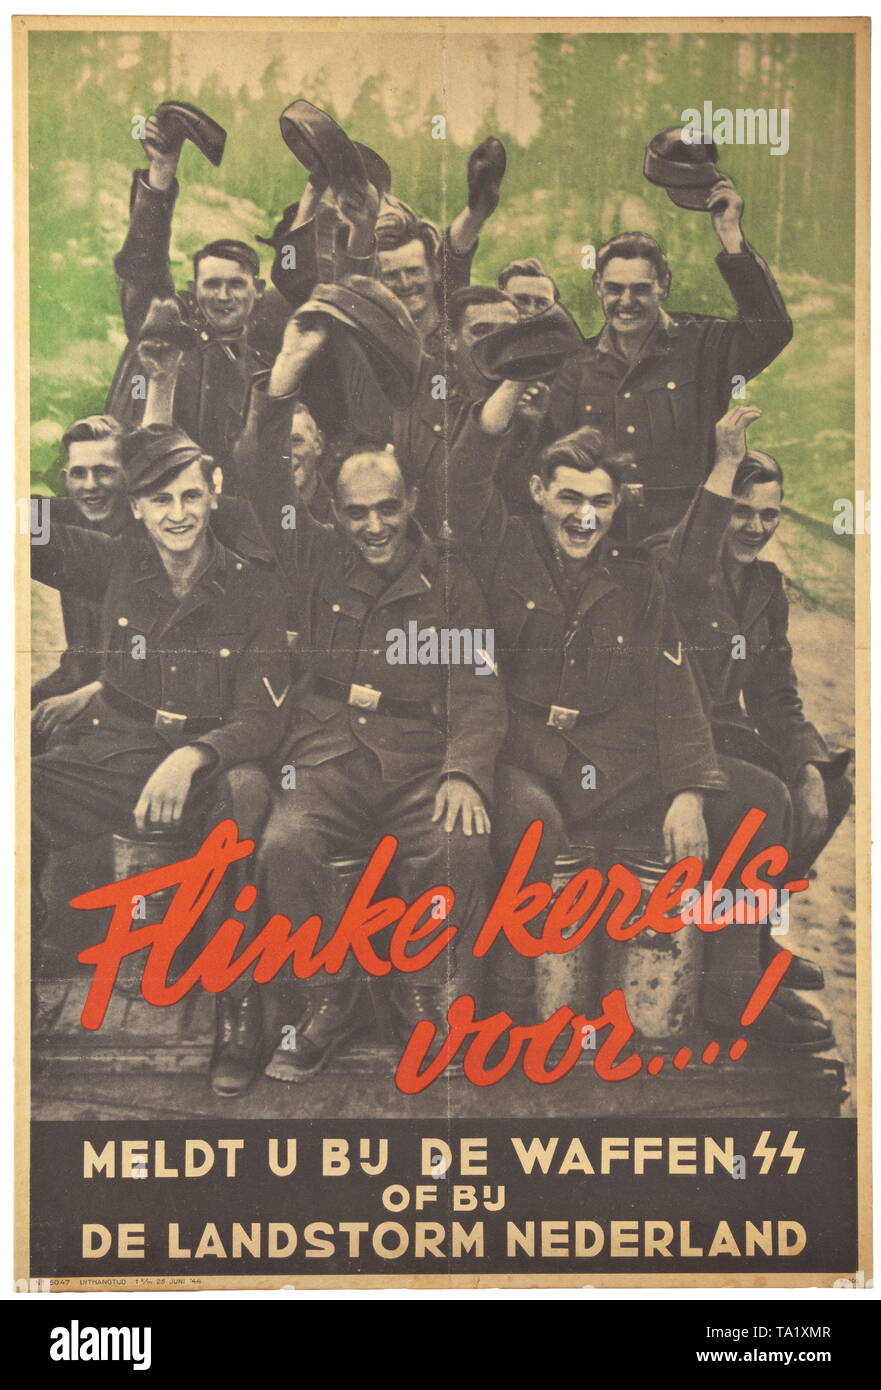 A Dutch poster advertising the Waffen-SS June 1944 historic, historical, 20th century, 1930s, 1940s, Waffen-SS, armed division of the SS, armed service, armed services, NS, National Socialism, Nazism, Third Reich, German Reich, Germany, military, militaria, utensil, piece of equipment, utensils, object, objects, stills, clipping, clippings, cut out, cut-out, cut-outs, fascism, fascistic, National Socialist, Nazi, Nazi period, Editorial-Use-Only Stock Photo